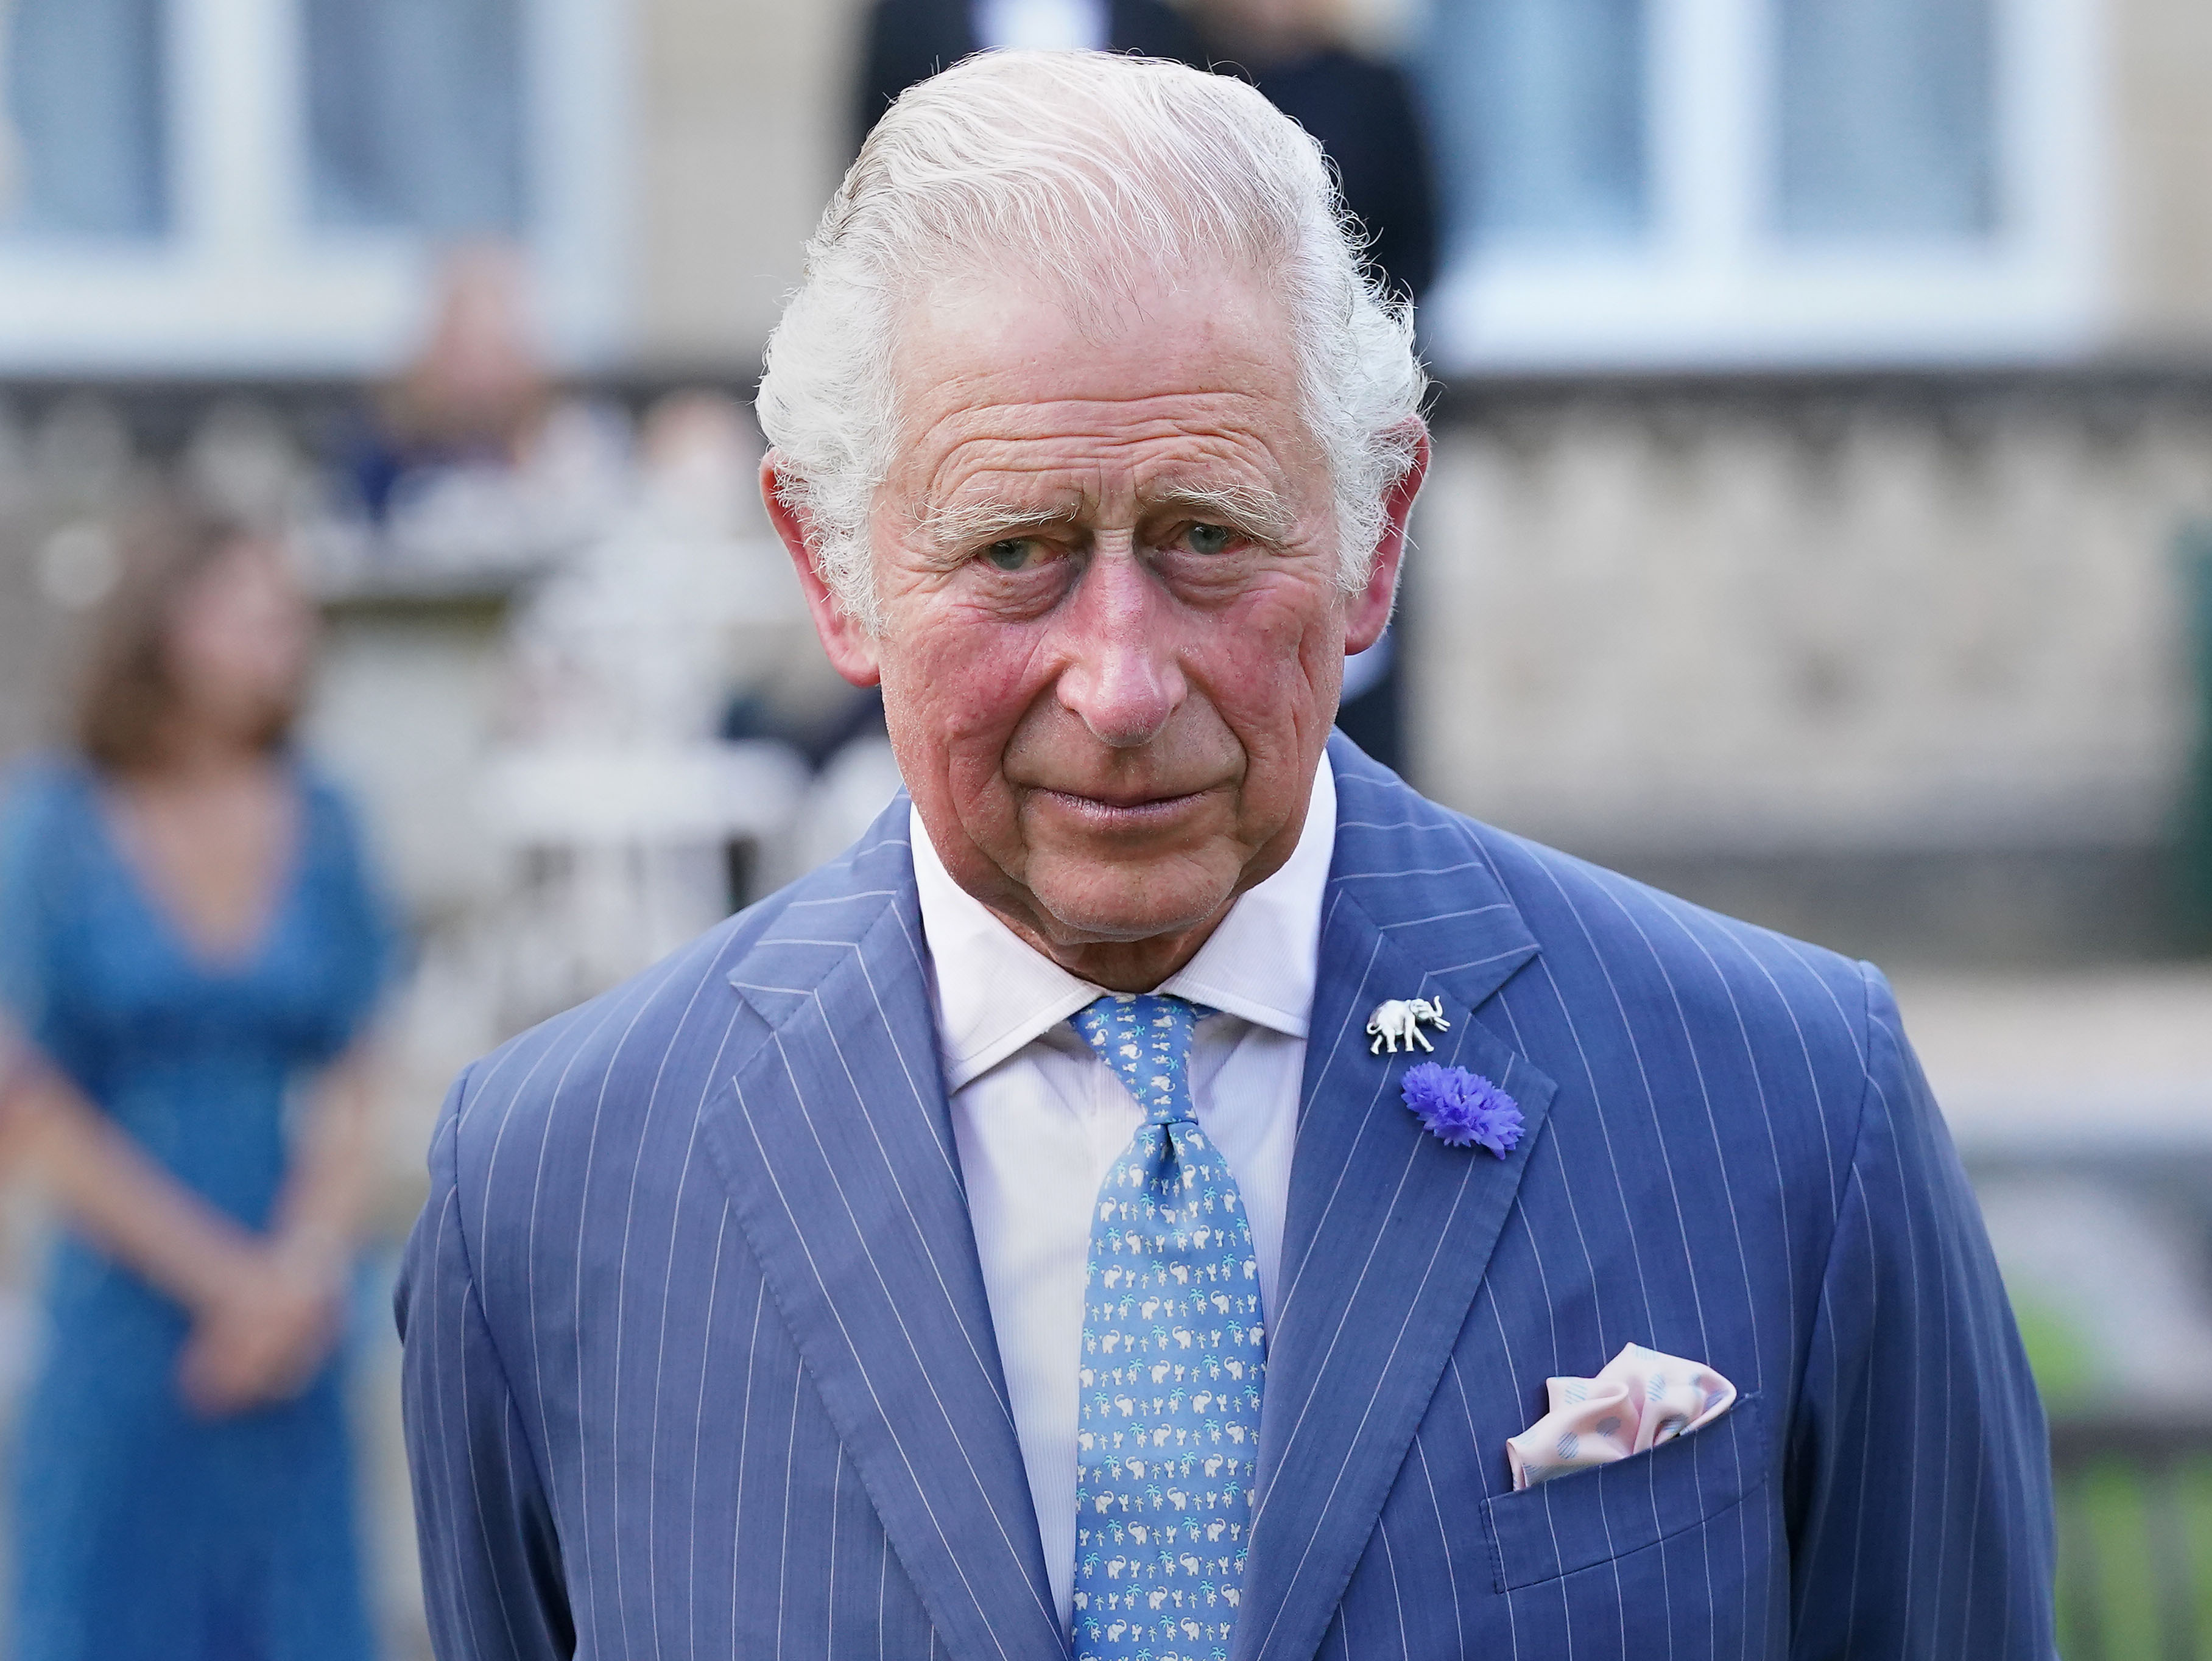 King Charles at Lancaster House on July 14, 2021, in London, England. | Source: Getty Images